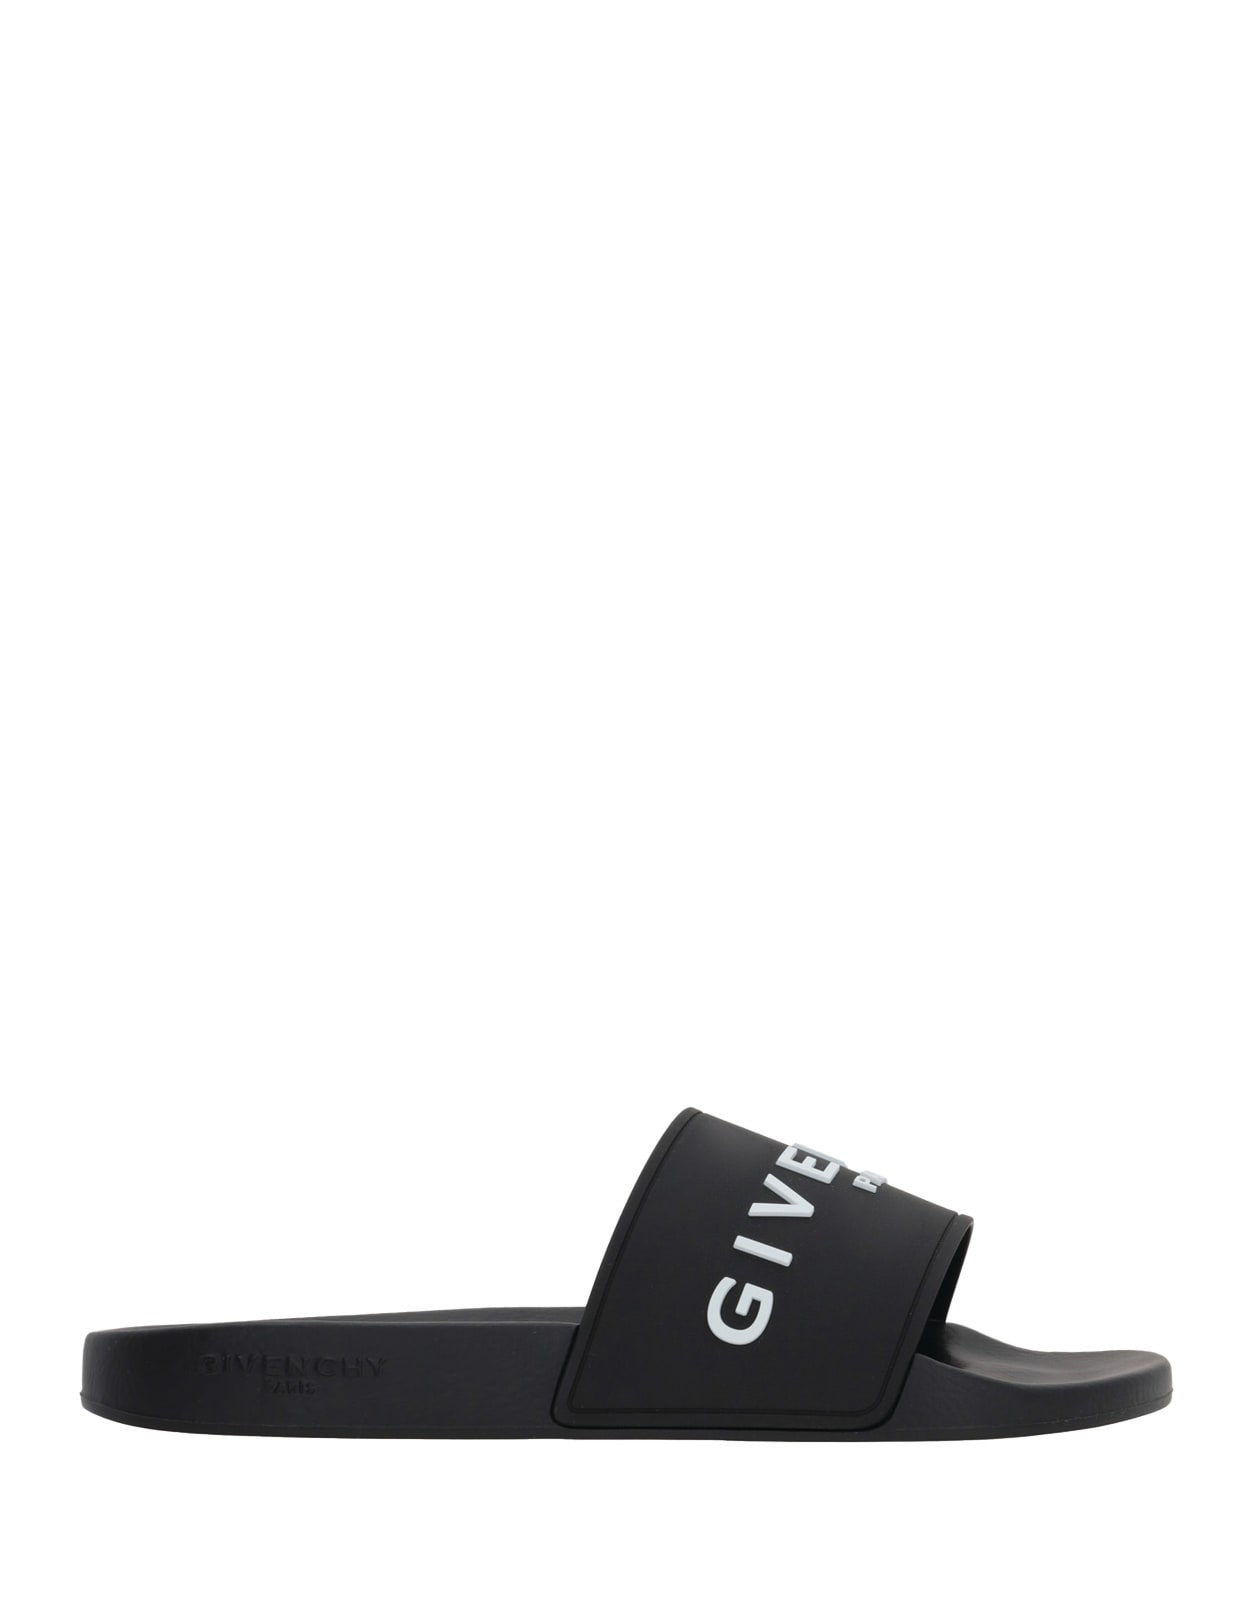 GIVENCHY BLACK RUBBER FLAT SANDAL WITH LOGO